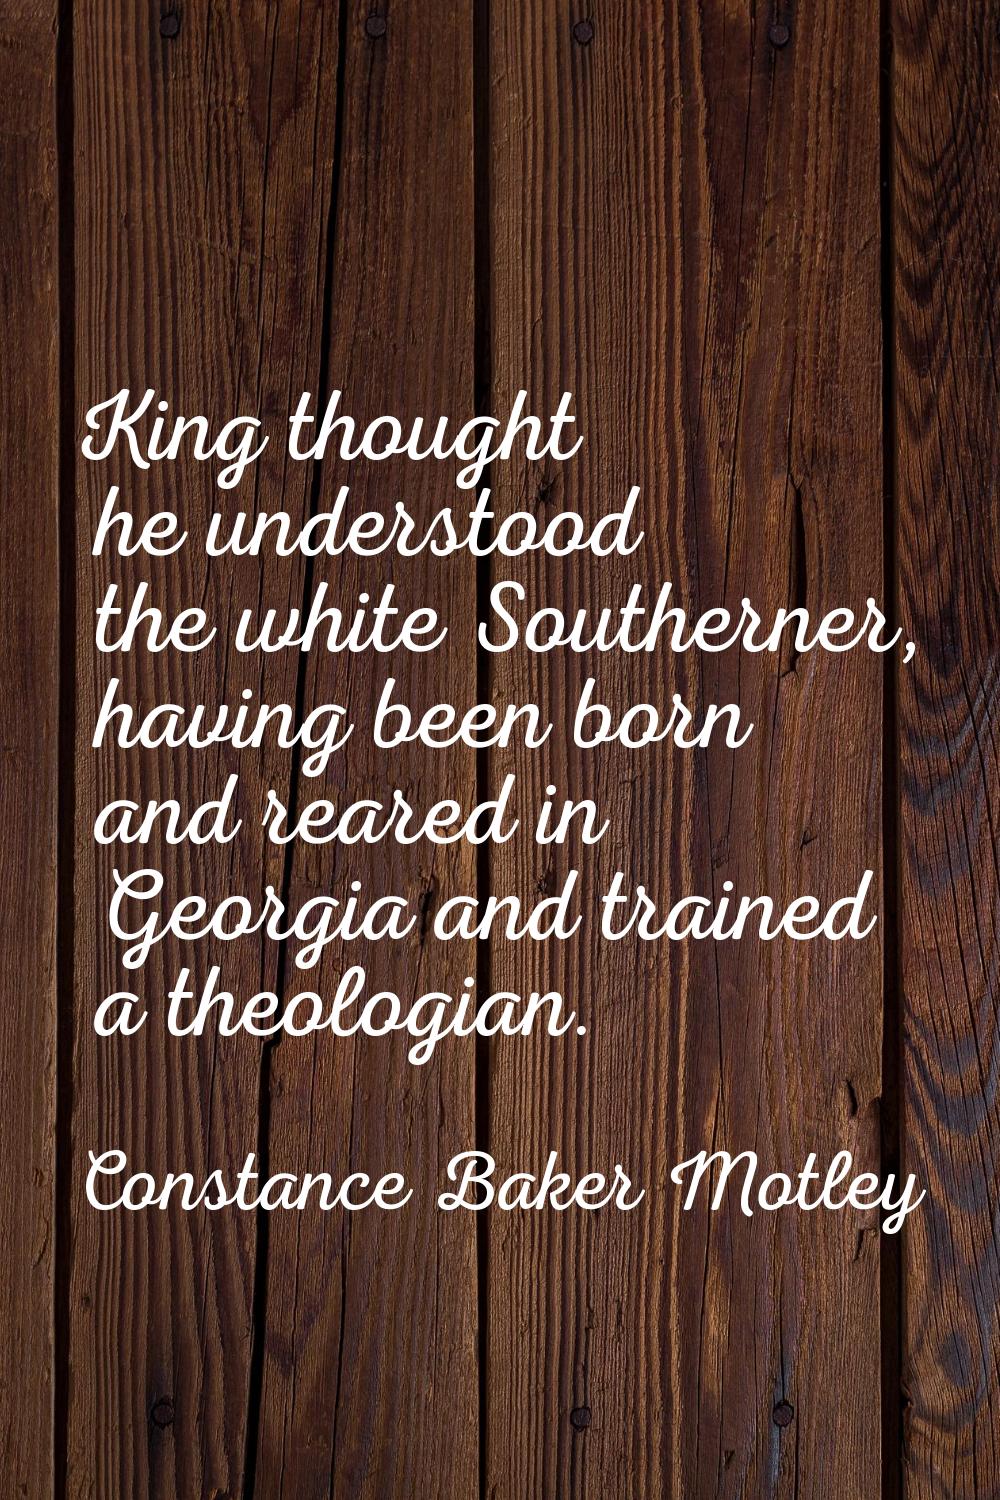 King thought he understood the white Southerner, having been born and reared in Georgia and trained